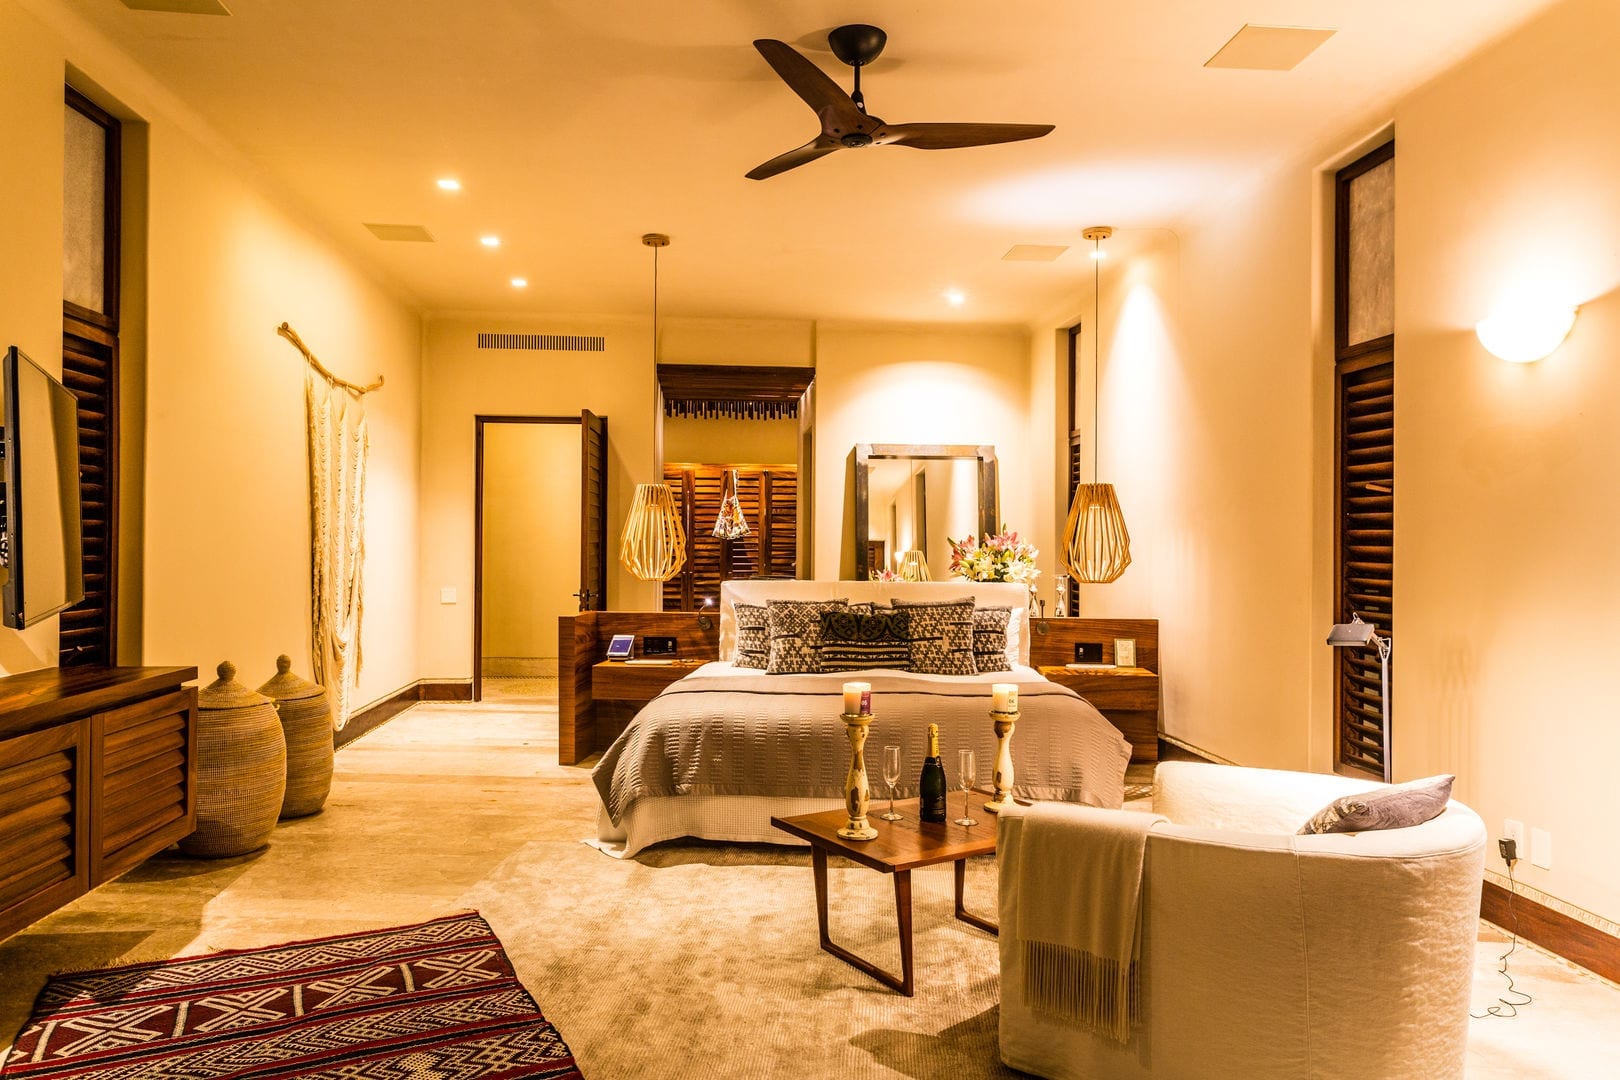 Experience opulence and relaxation in the master bedroom of Casa Escondida, where every moment promises ultimate comfort and serenity.